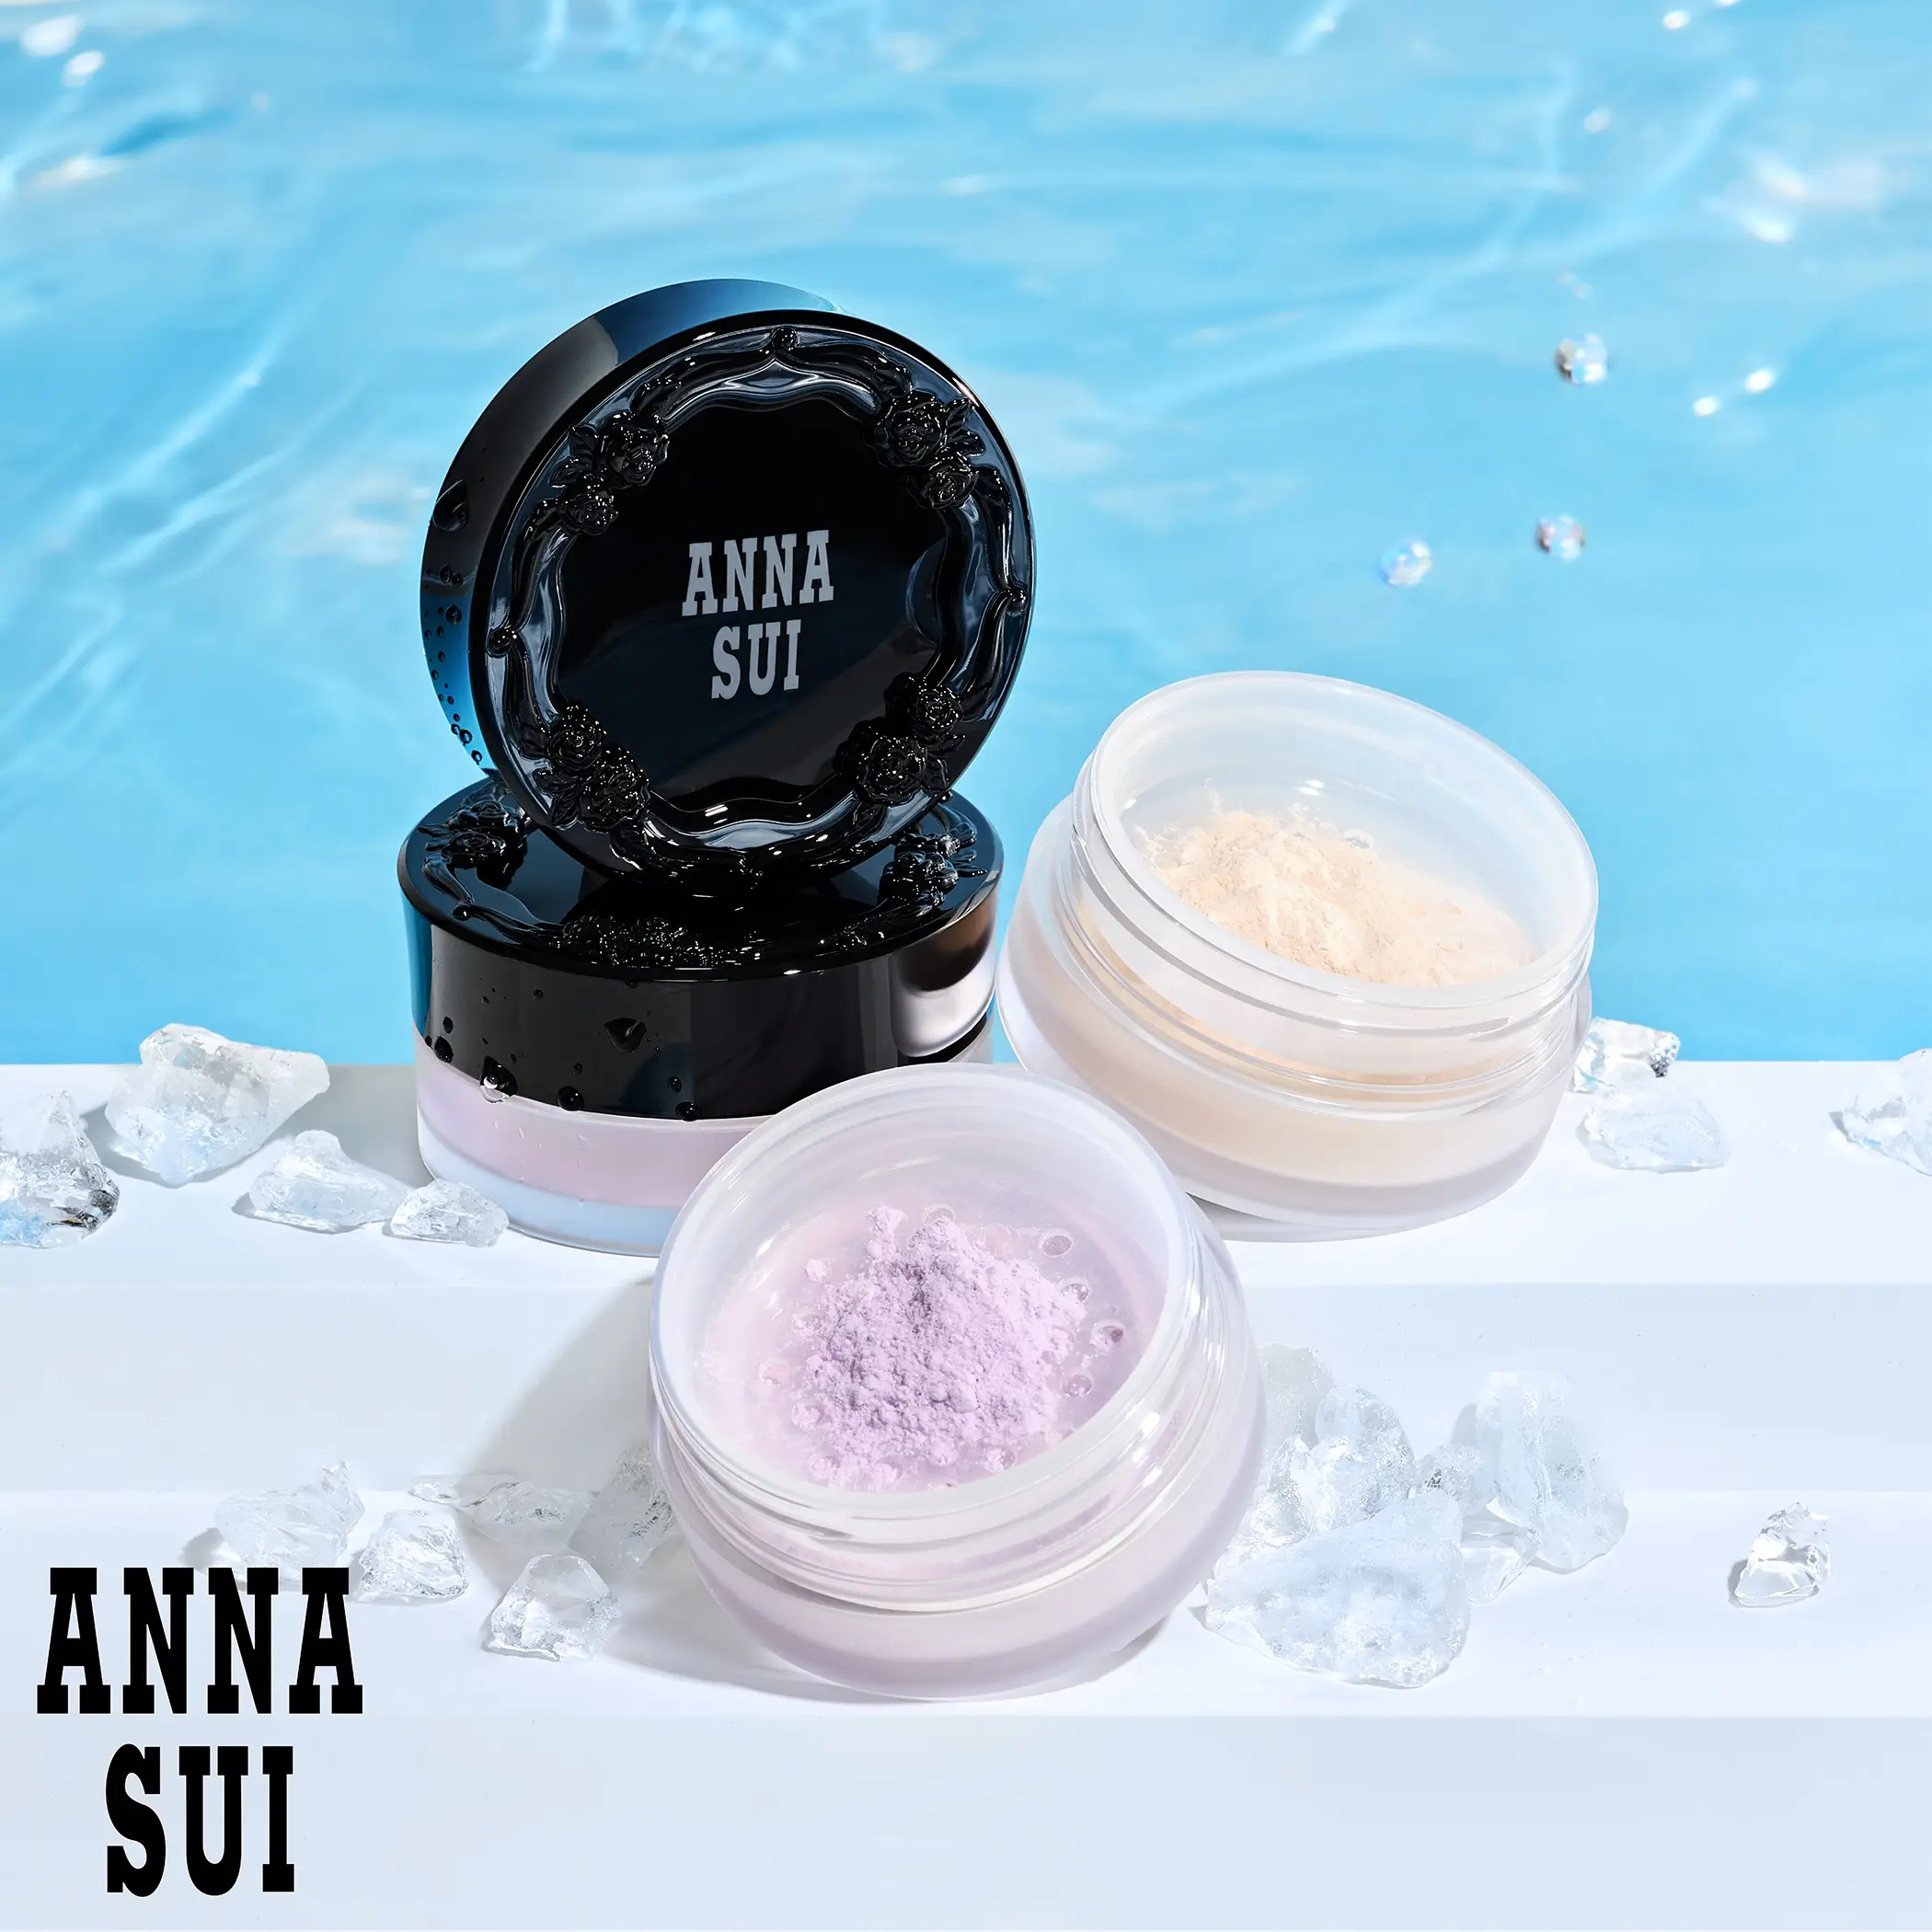 Water Powder limited editions from Anna Sui